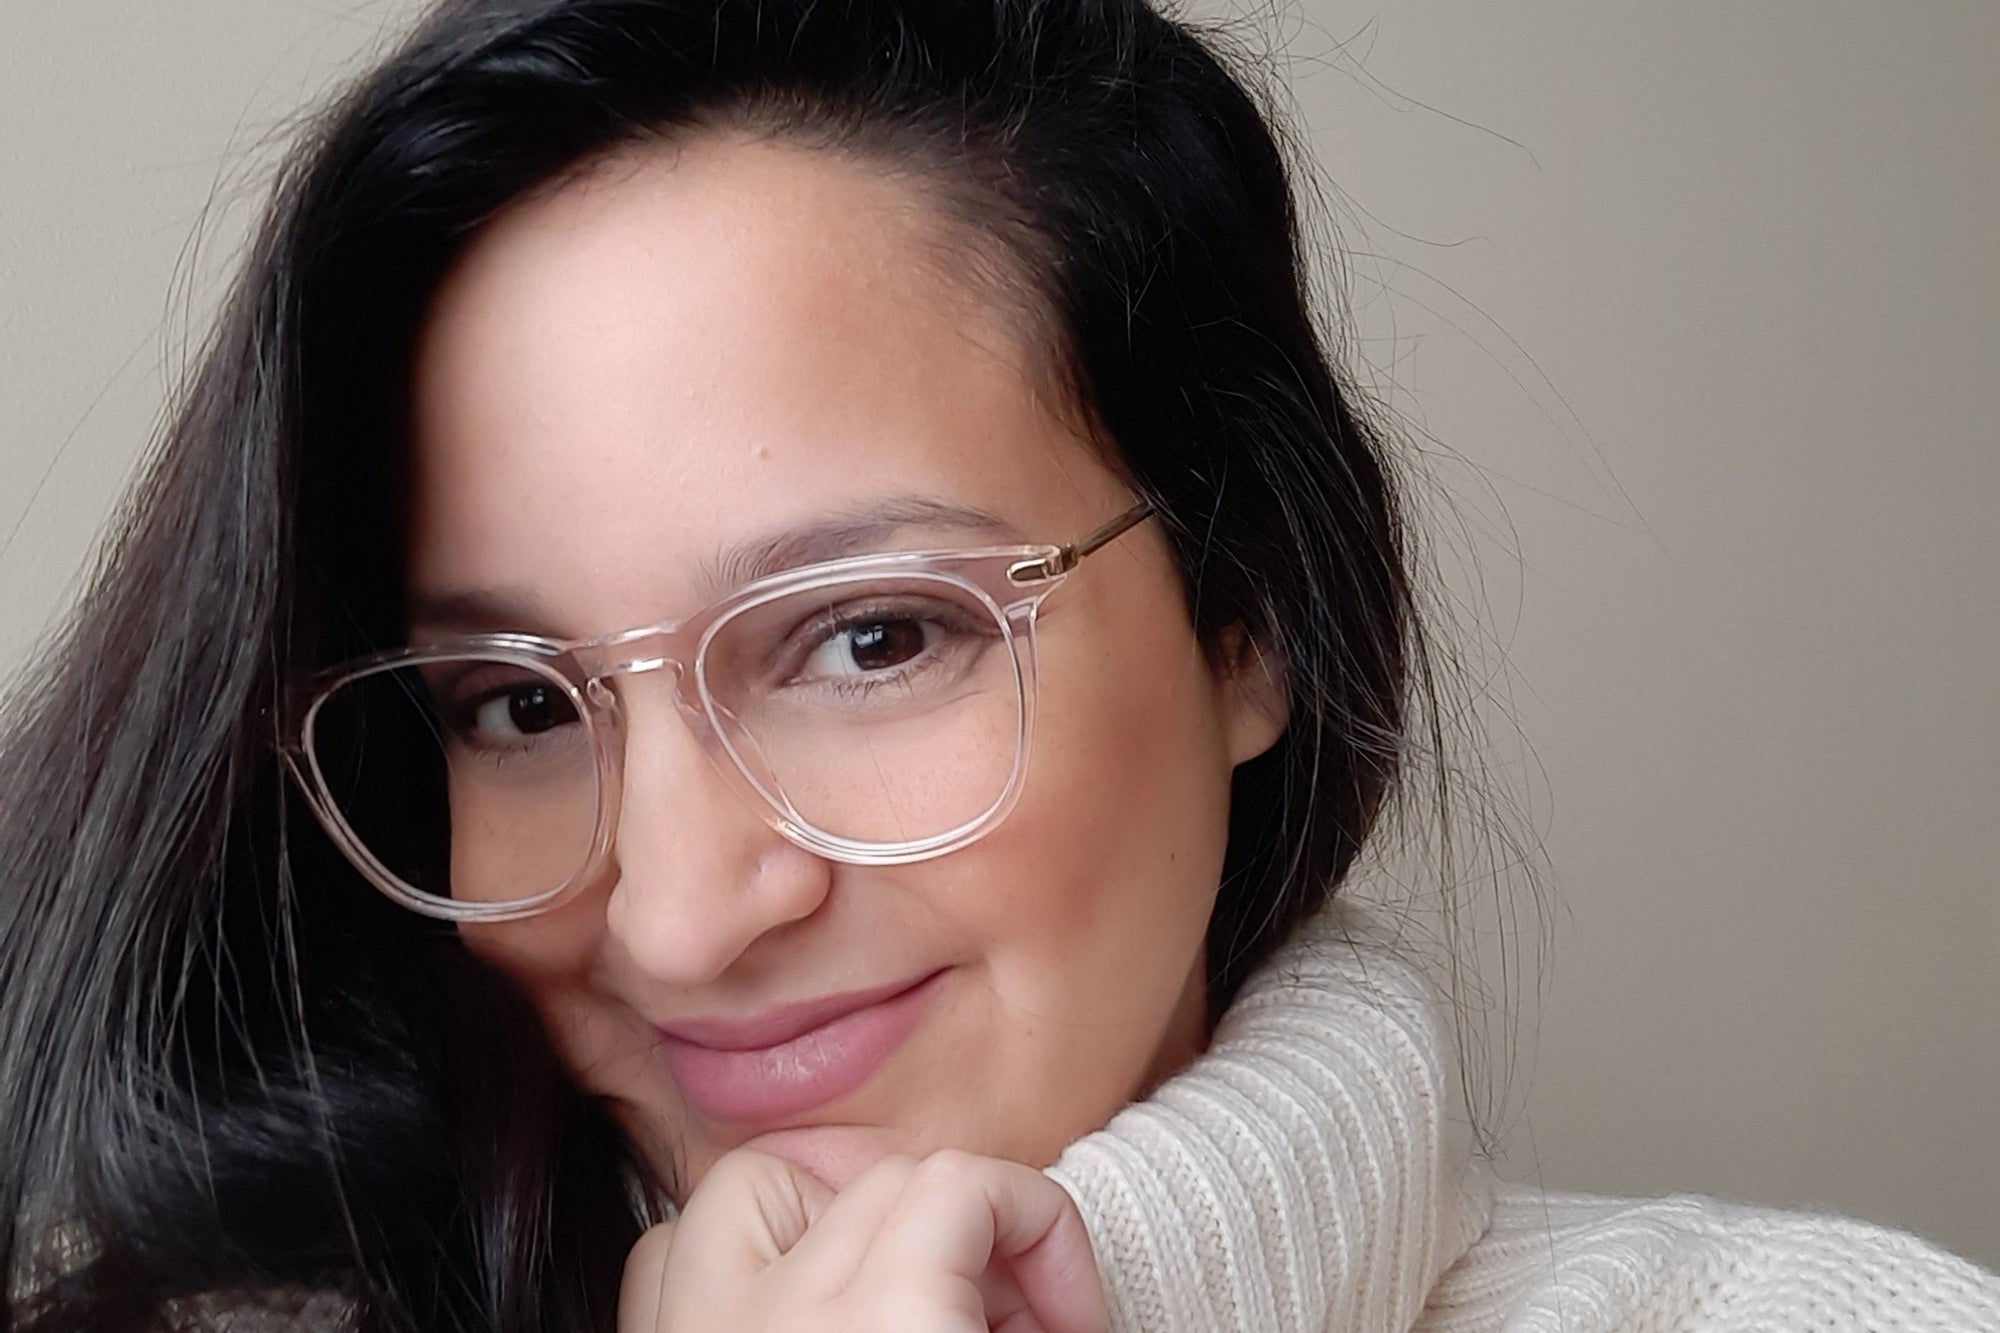 Are Your Glasses Supposed To Cover Your Eyebrows? | KOALAEYE OPTICAL